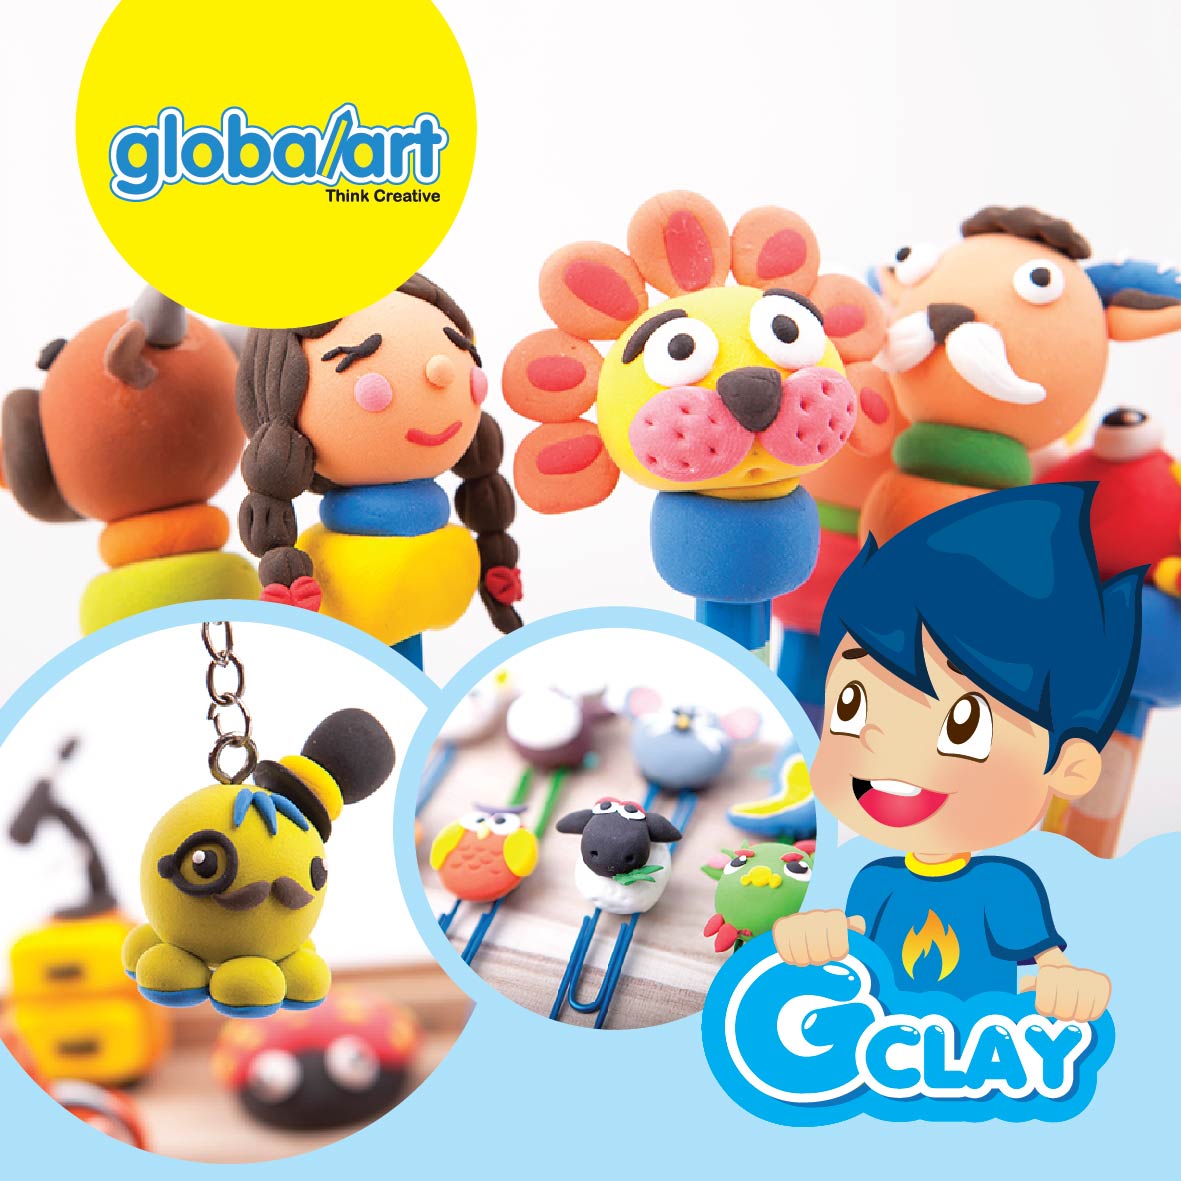 G-clay Modeling